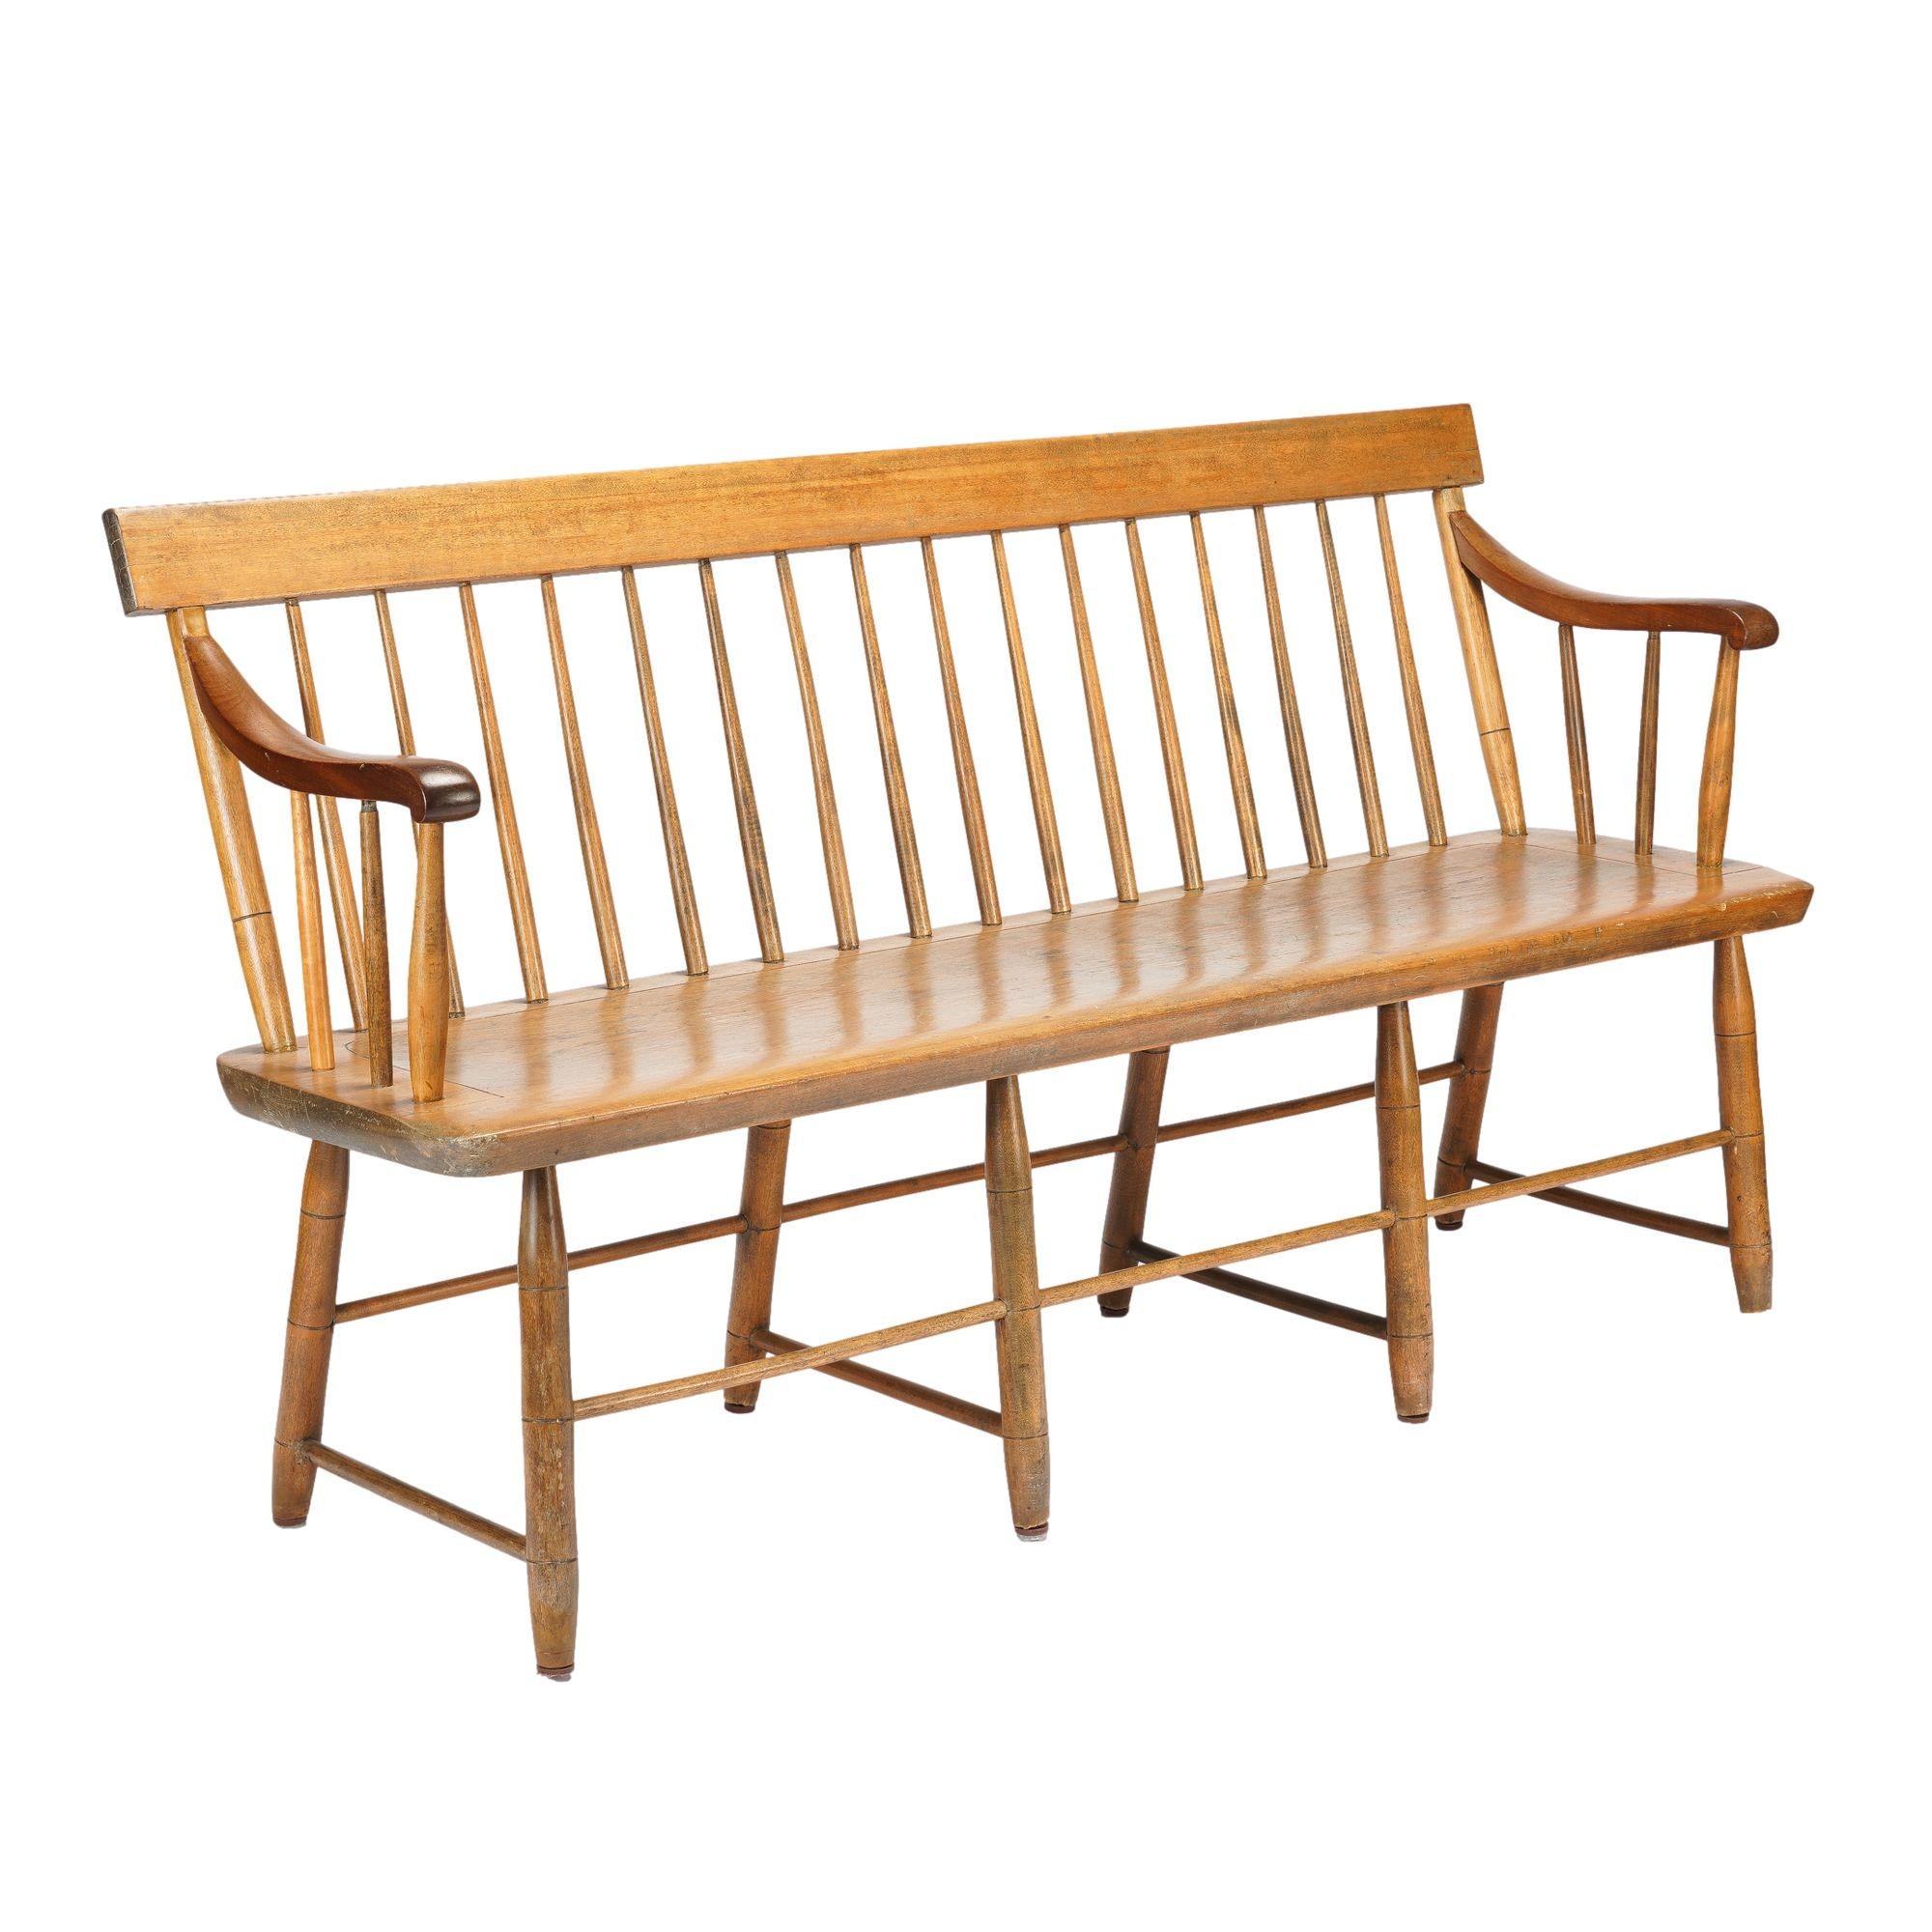 American Windsor bench, c. 1830 For Sale 2